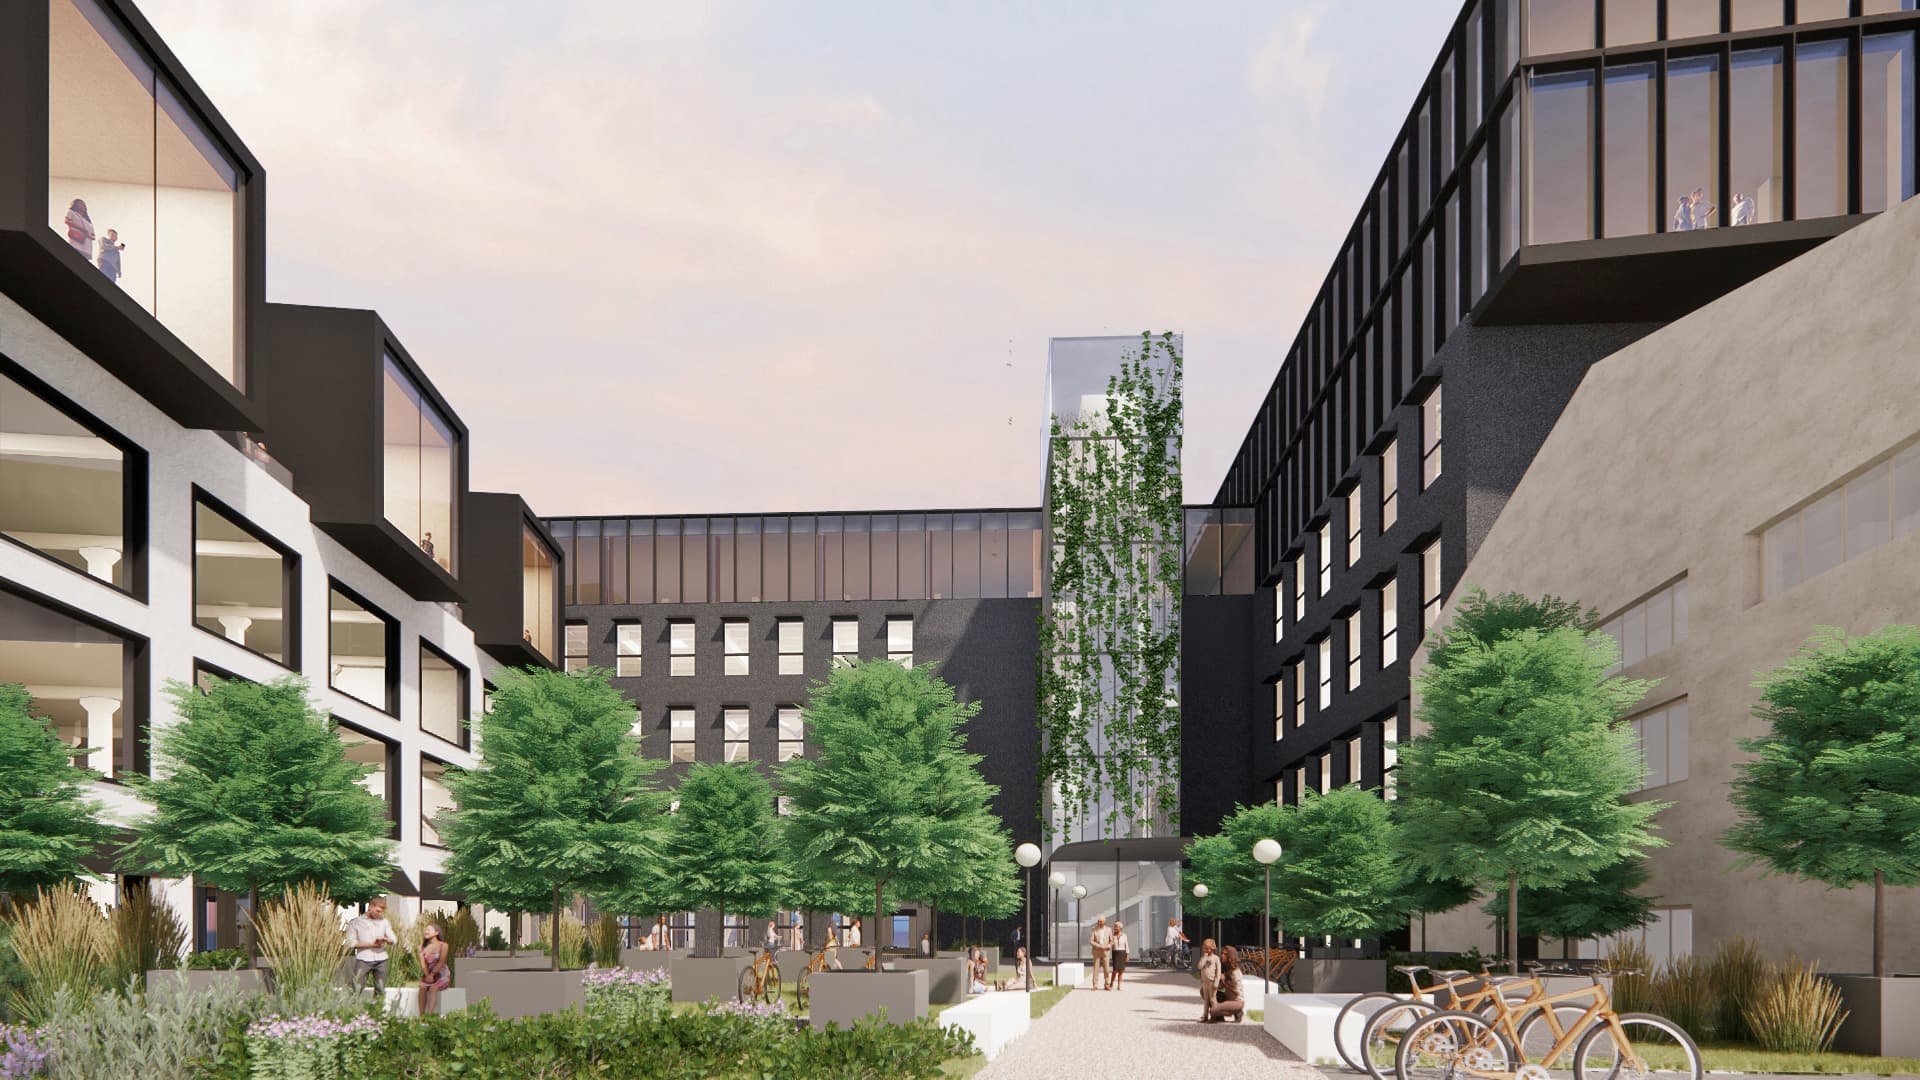 Check out this $110 million tech campus being built in Lithuania — the largest in Europe